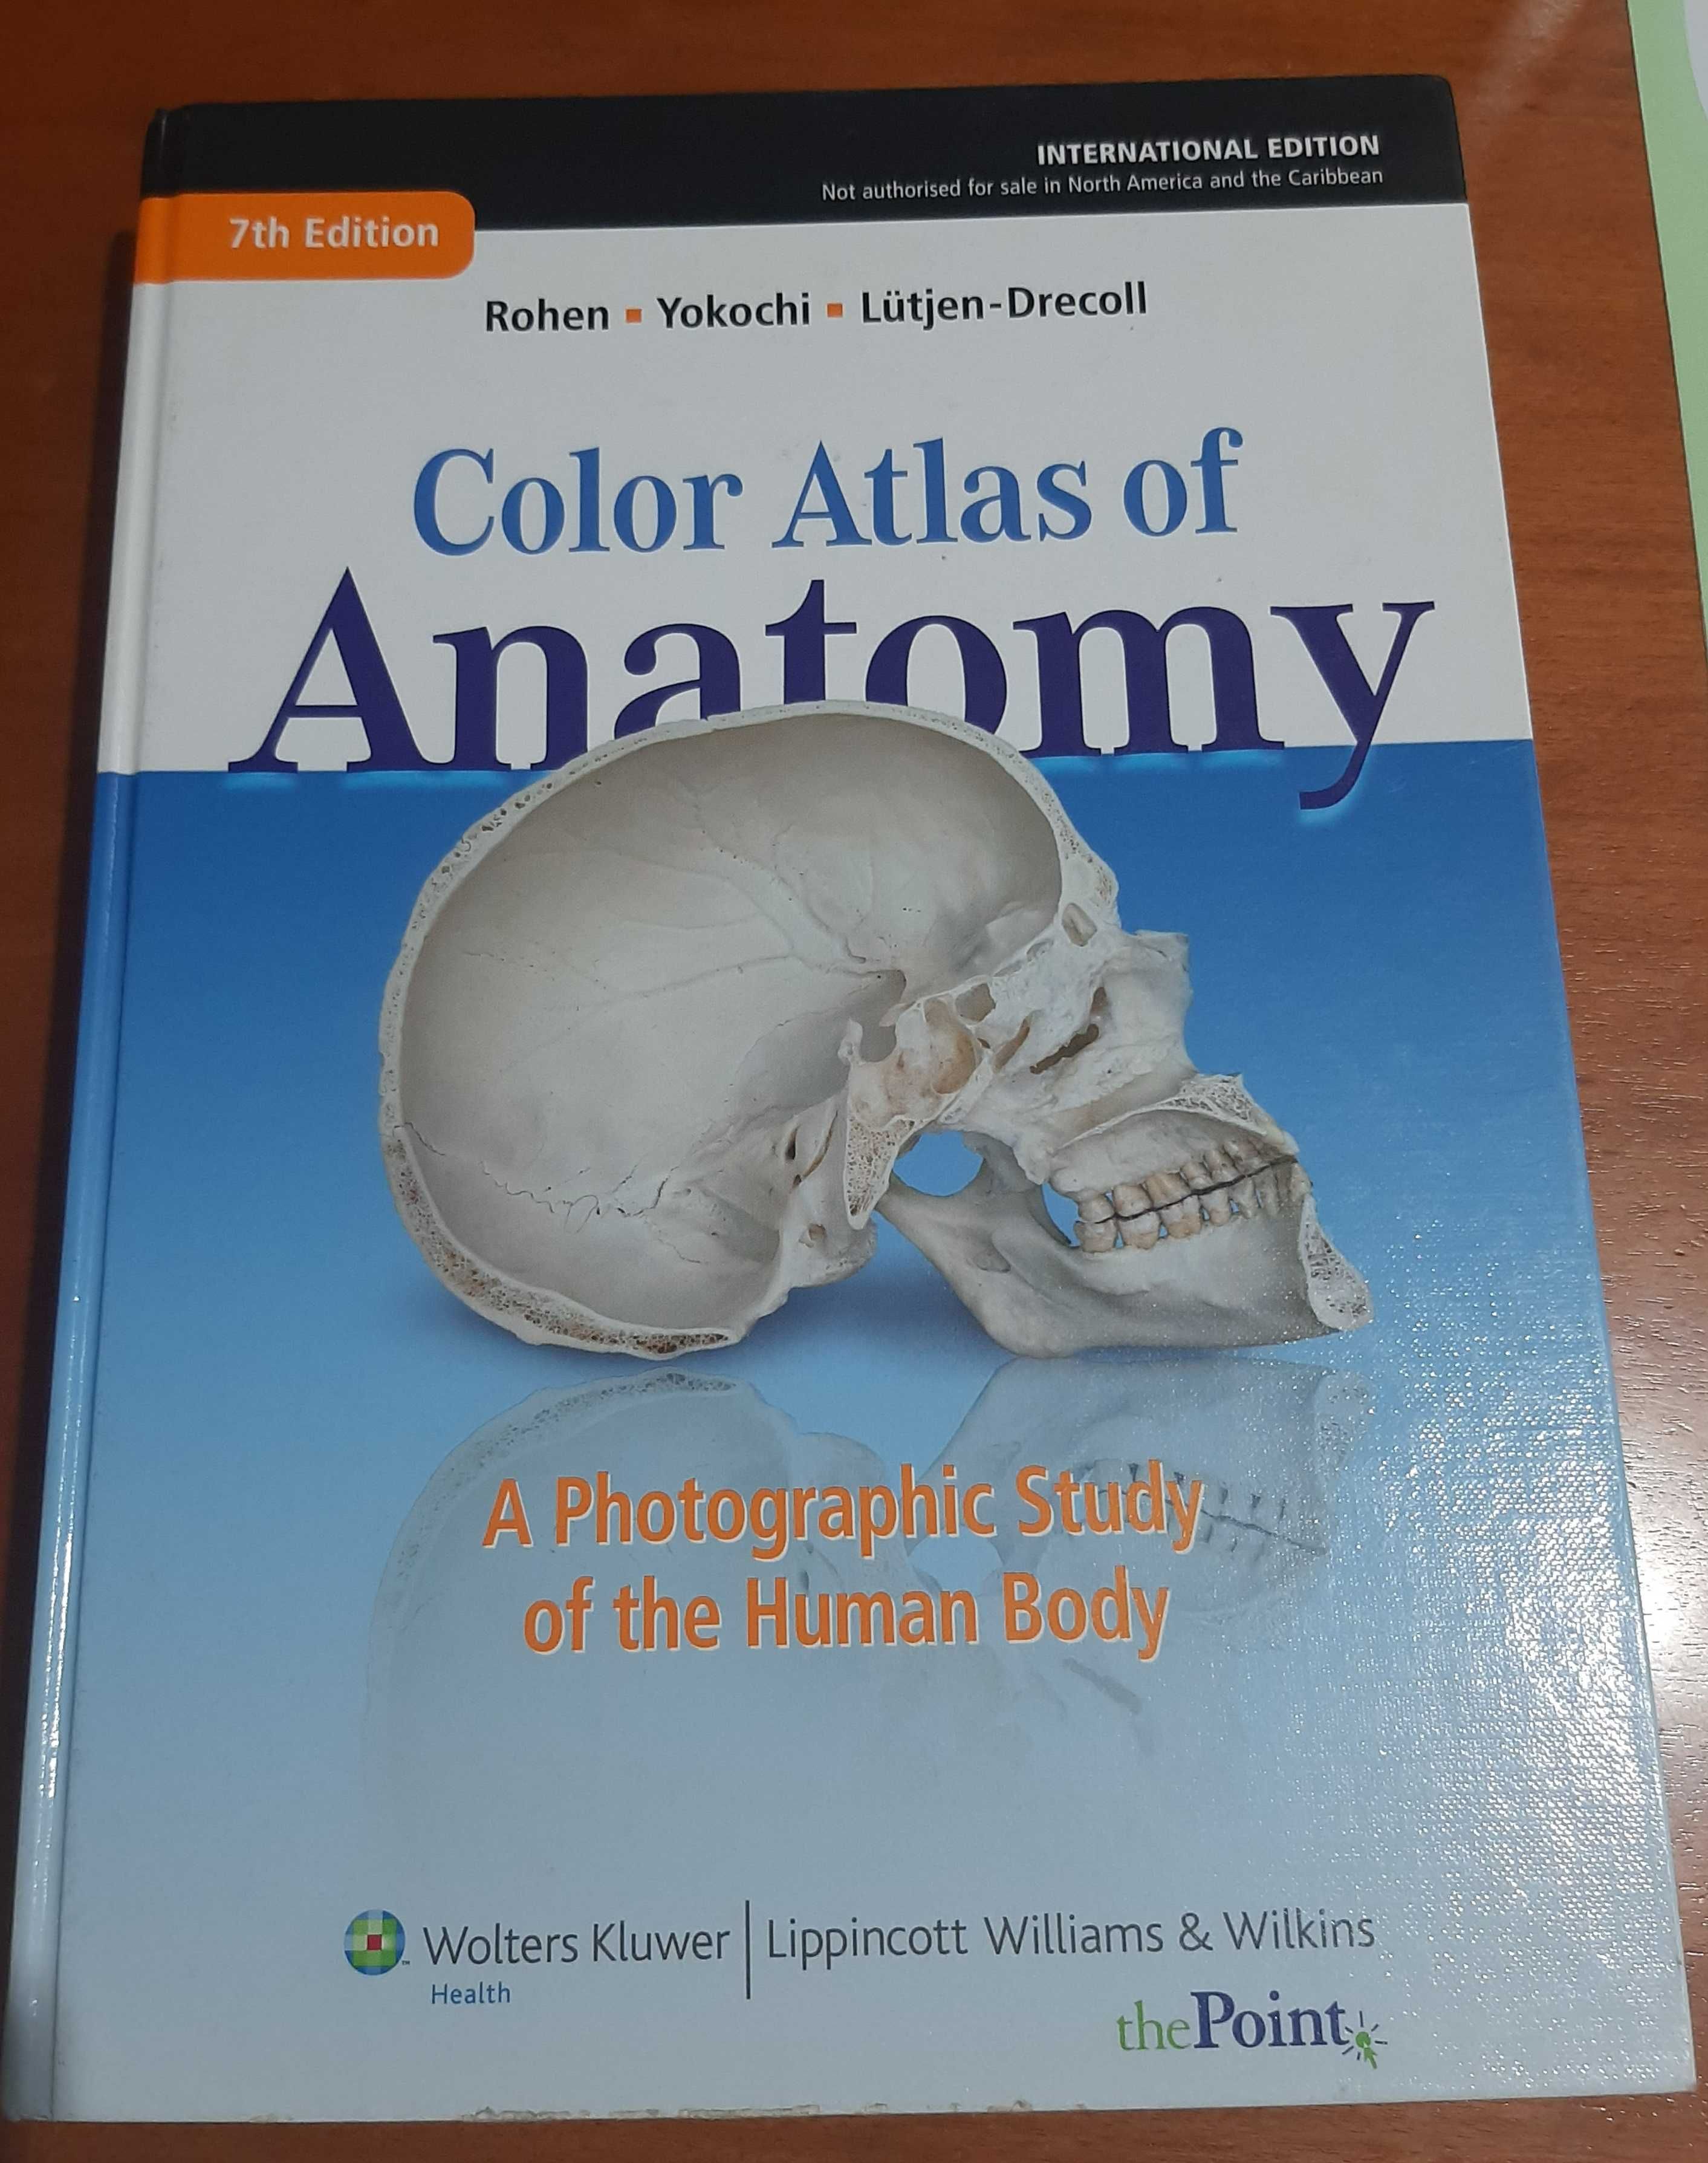 Livro - Color Atlas of Anatomy: A Photographic Study of the Human Body